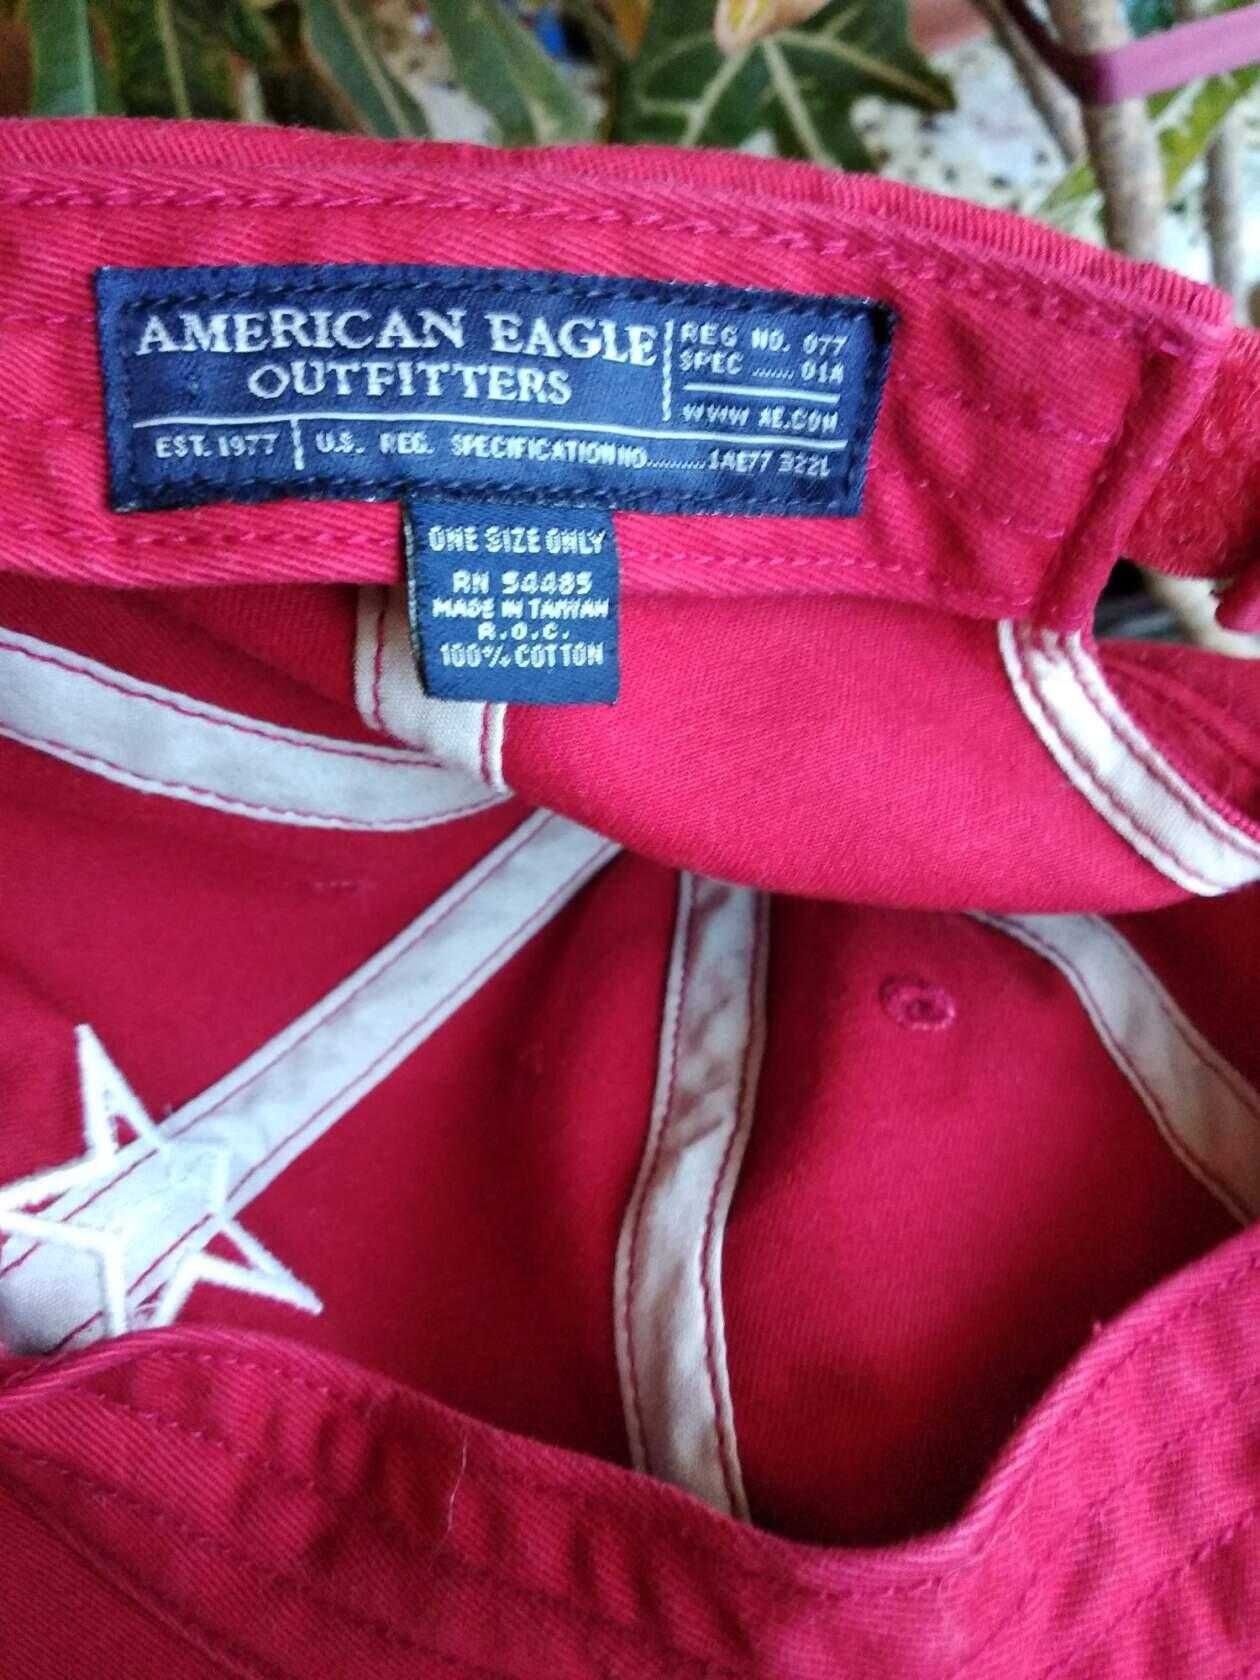 Стильная бейсболка  American Eagle Outfitters. размер   one size only